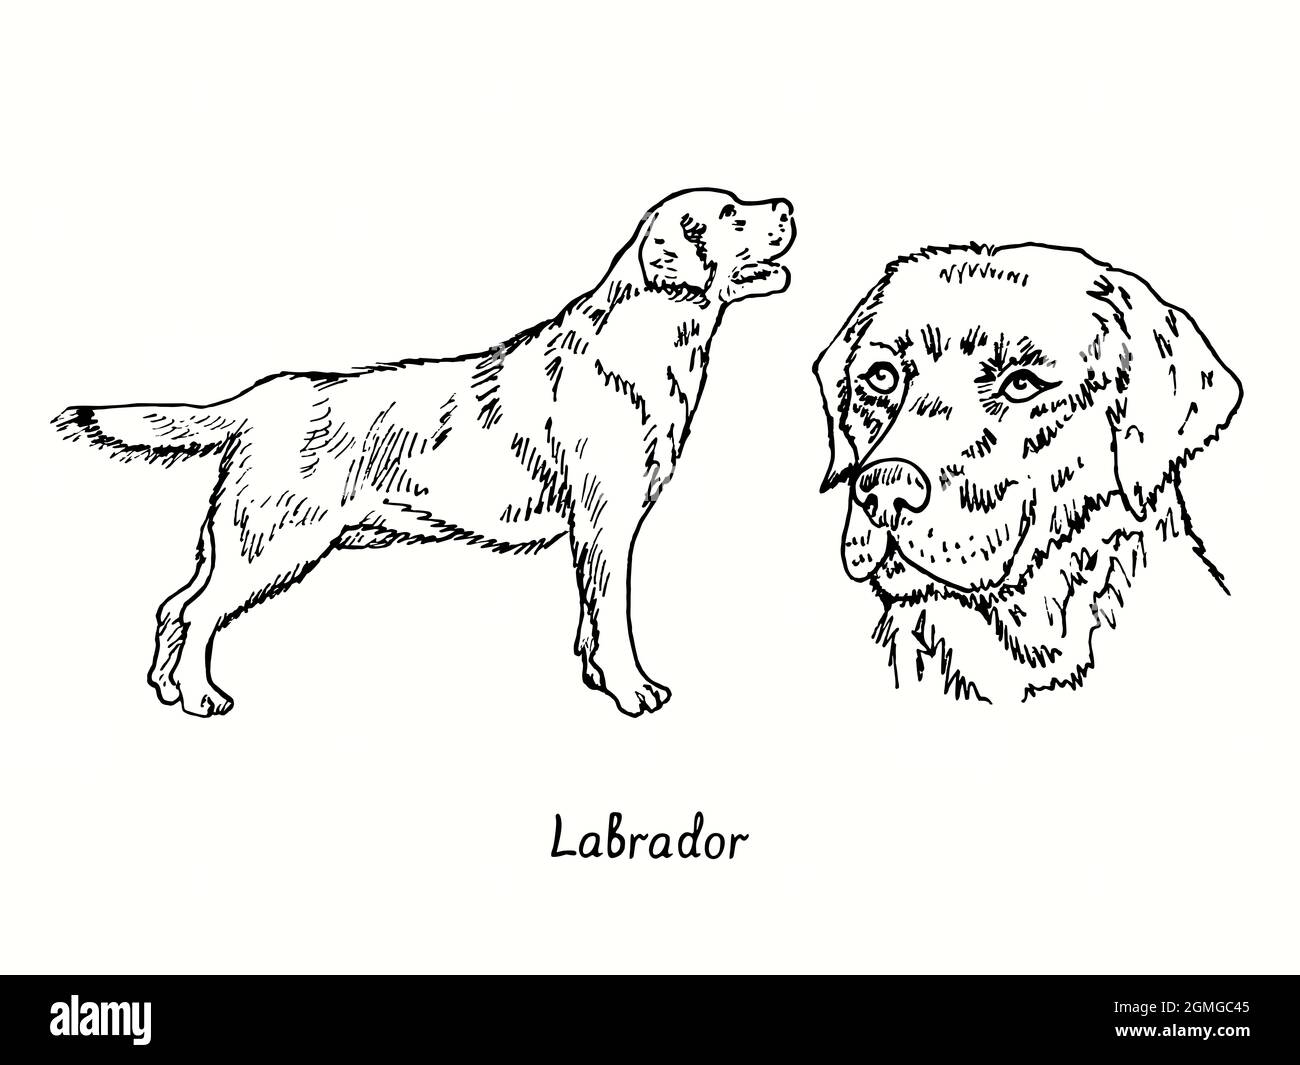 Labrador Retriever collection standing side view and head. Ink black and white doodle drawing in woodcut style. Stock Photo